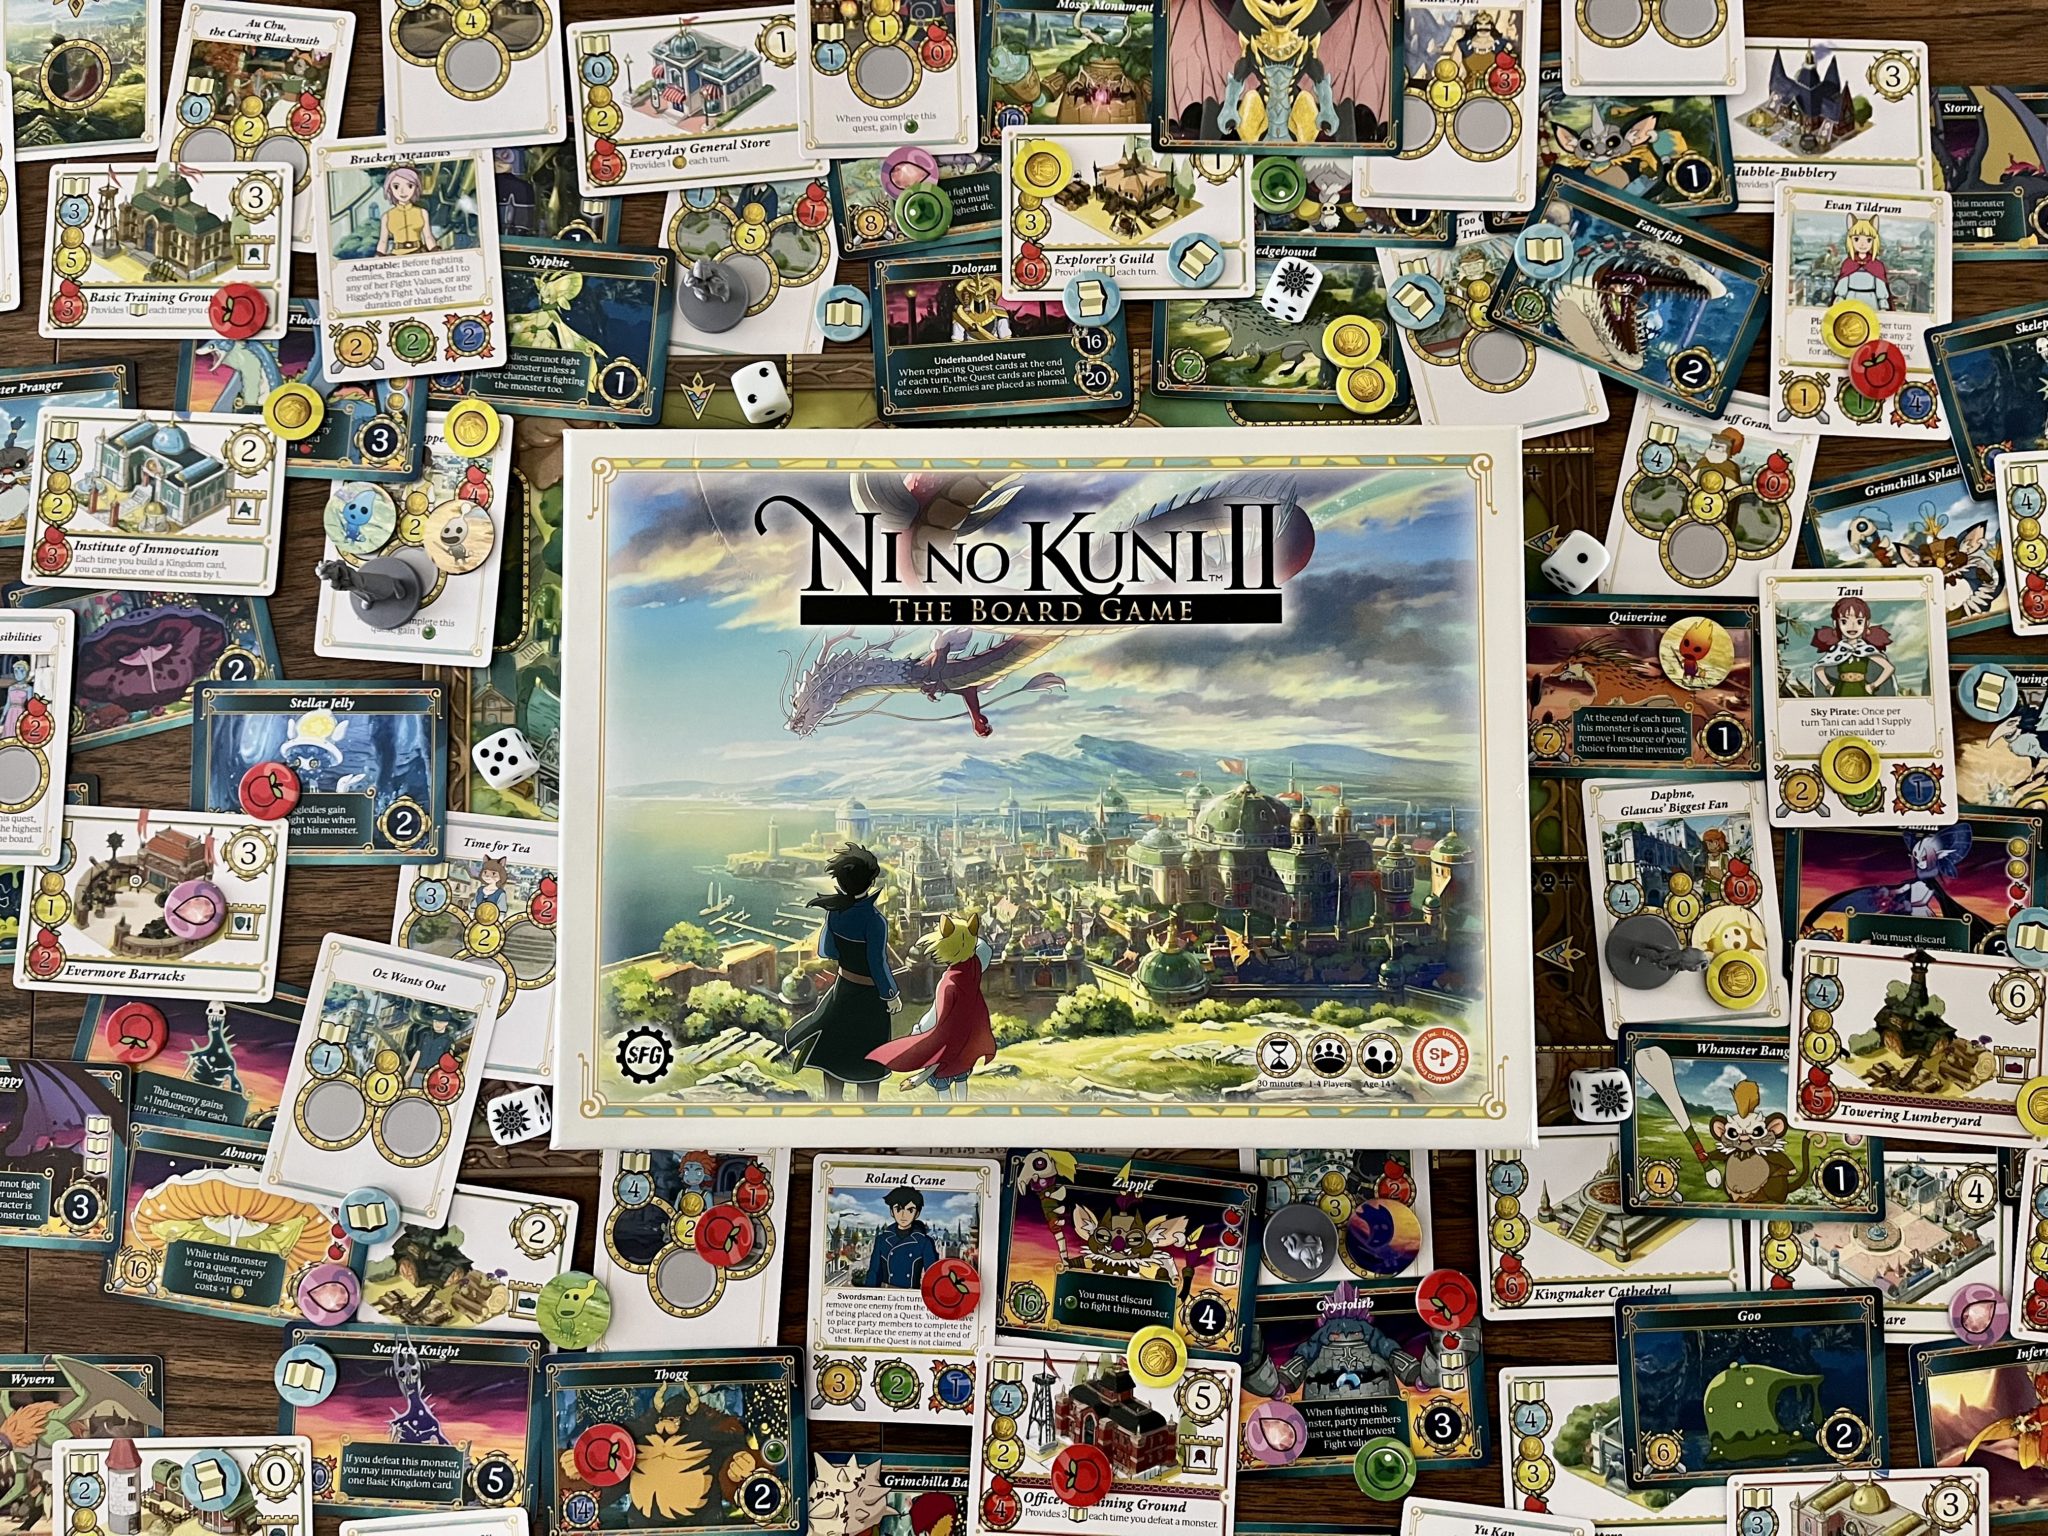 Ni No Kuni II: The Board Game with components set out on the table